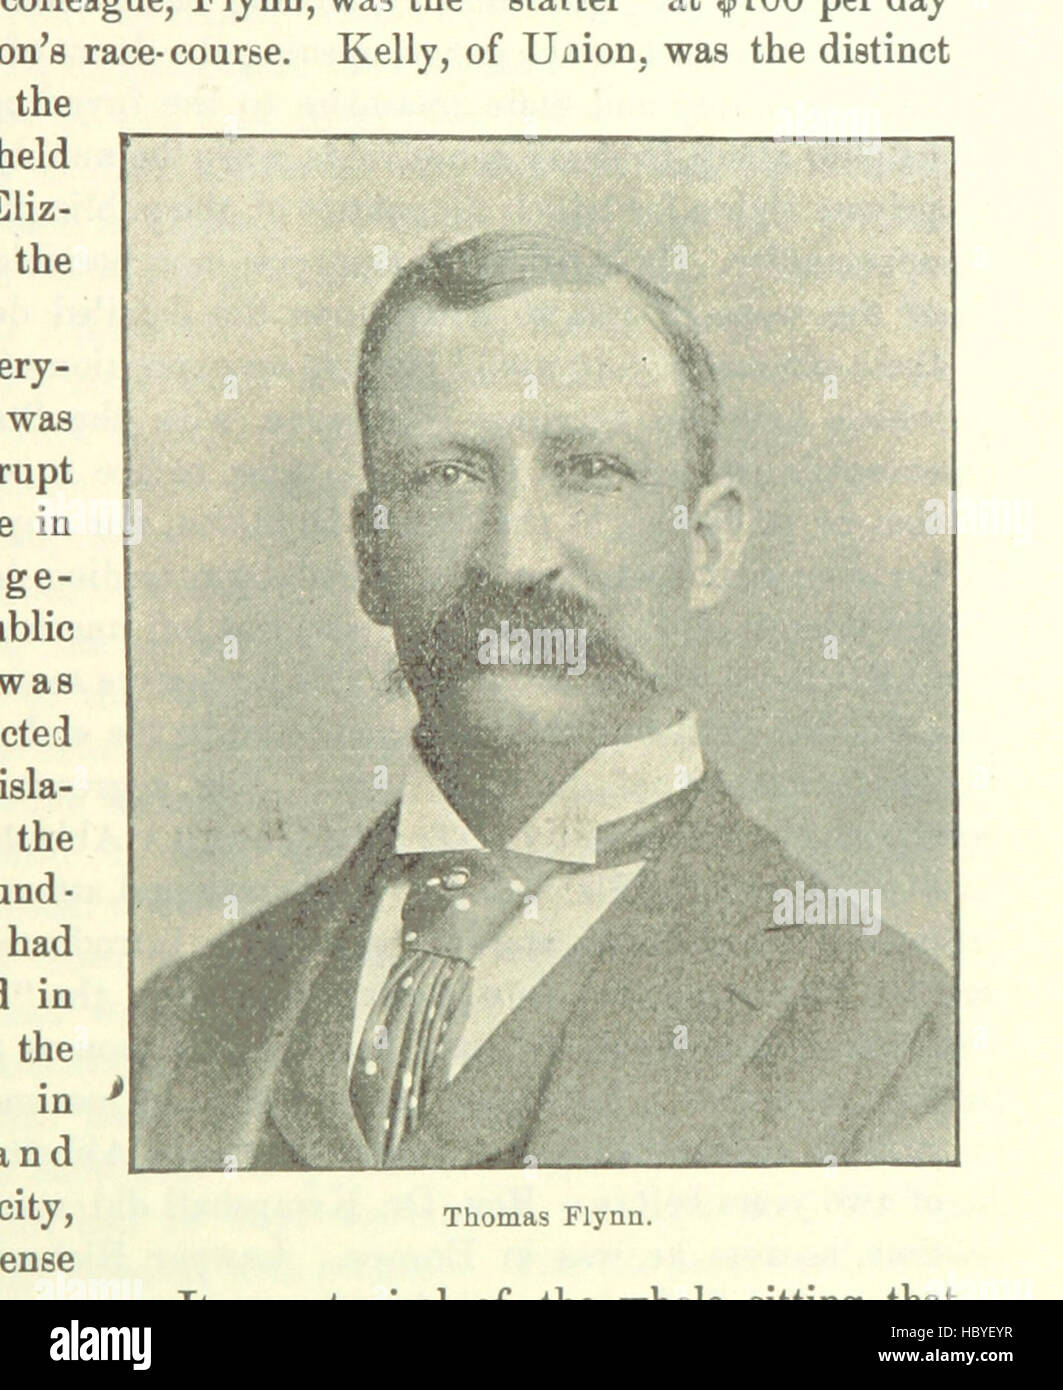 Image taken from page 447 of 'Modern Battles of Trenton. Being a history of New Jersey's politics ... from ... 1868 to ... 1894' Image taken from page 447 of 'Modern Battles of Trenton Stock Photo